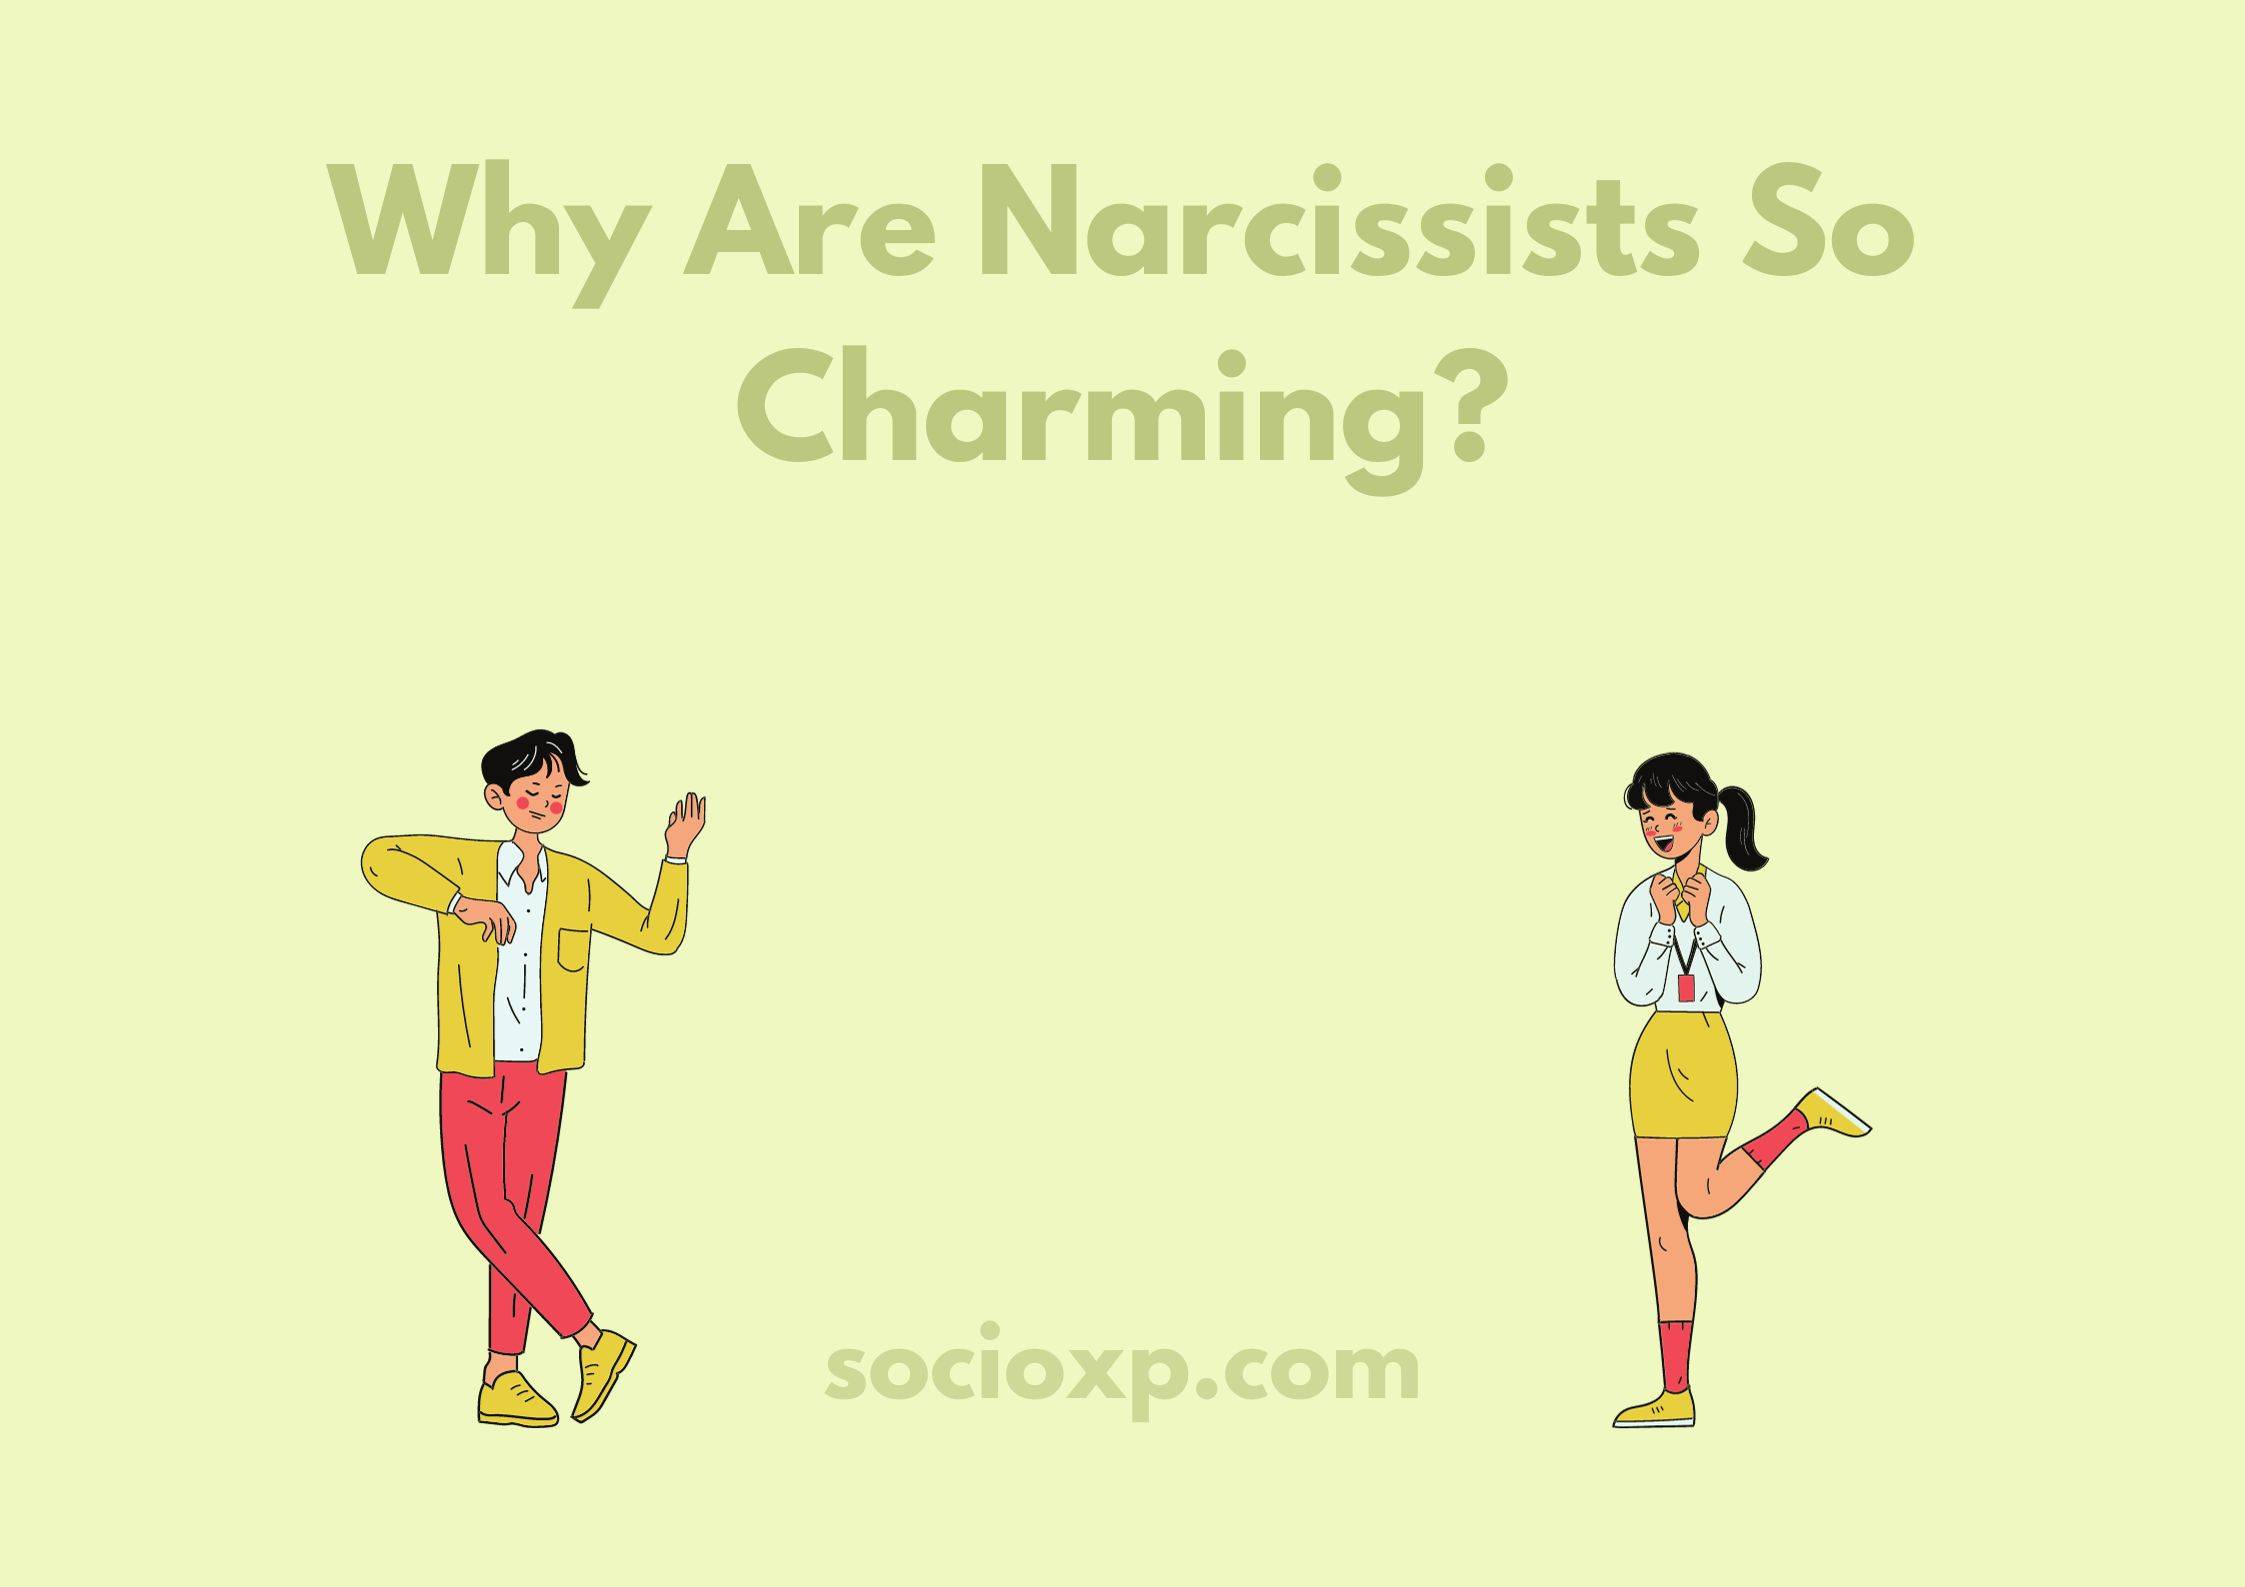 Why Are Narcissists So Charming?